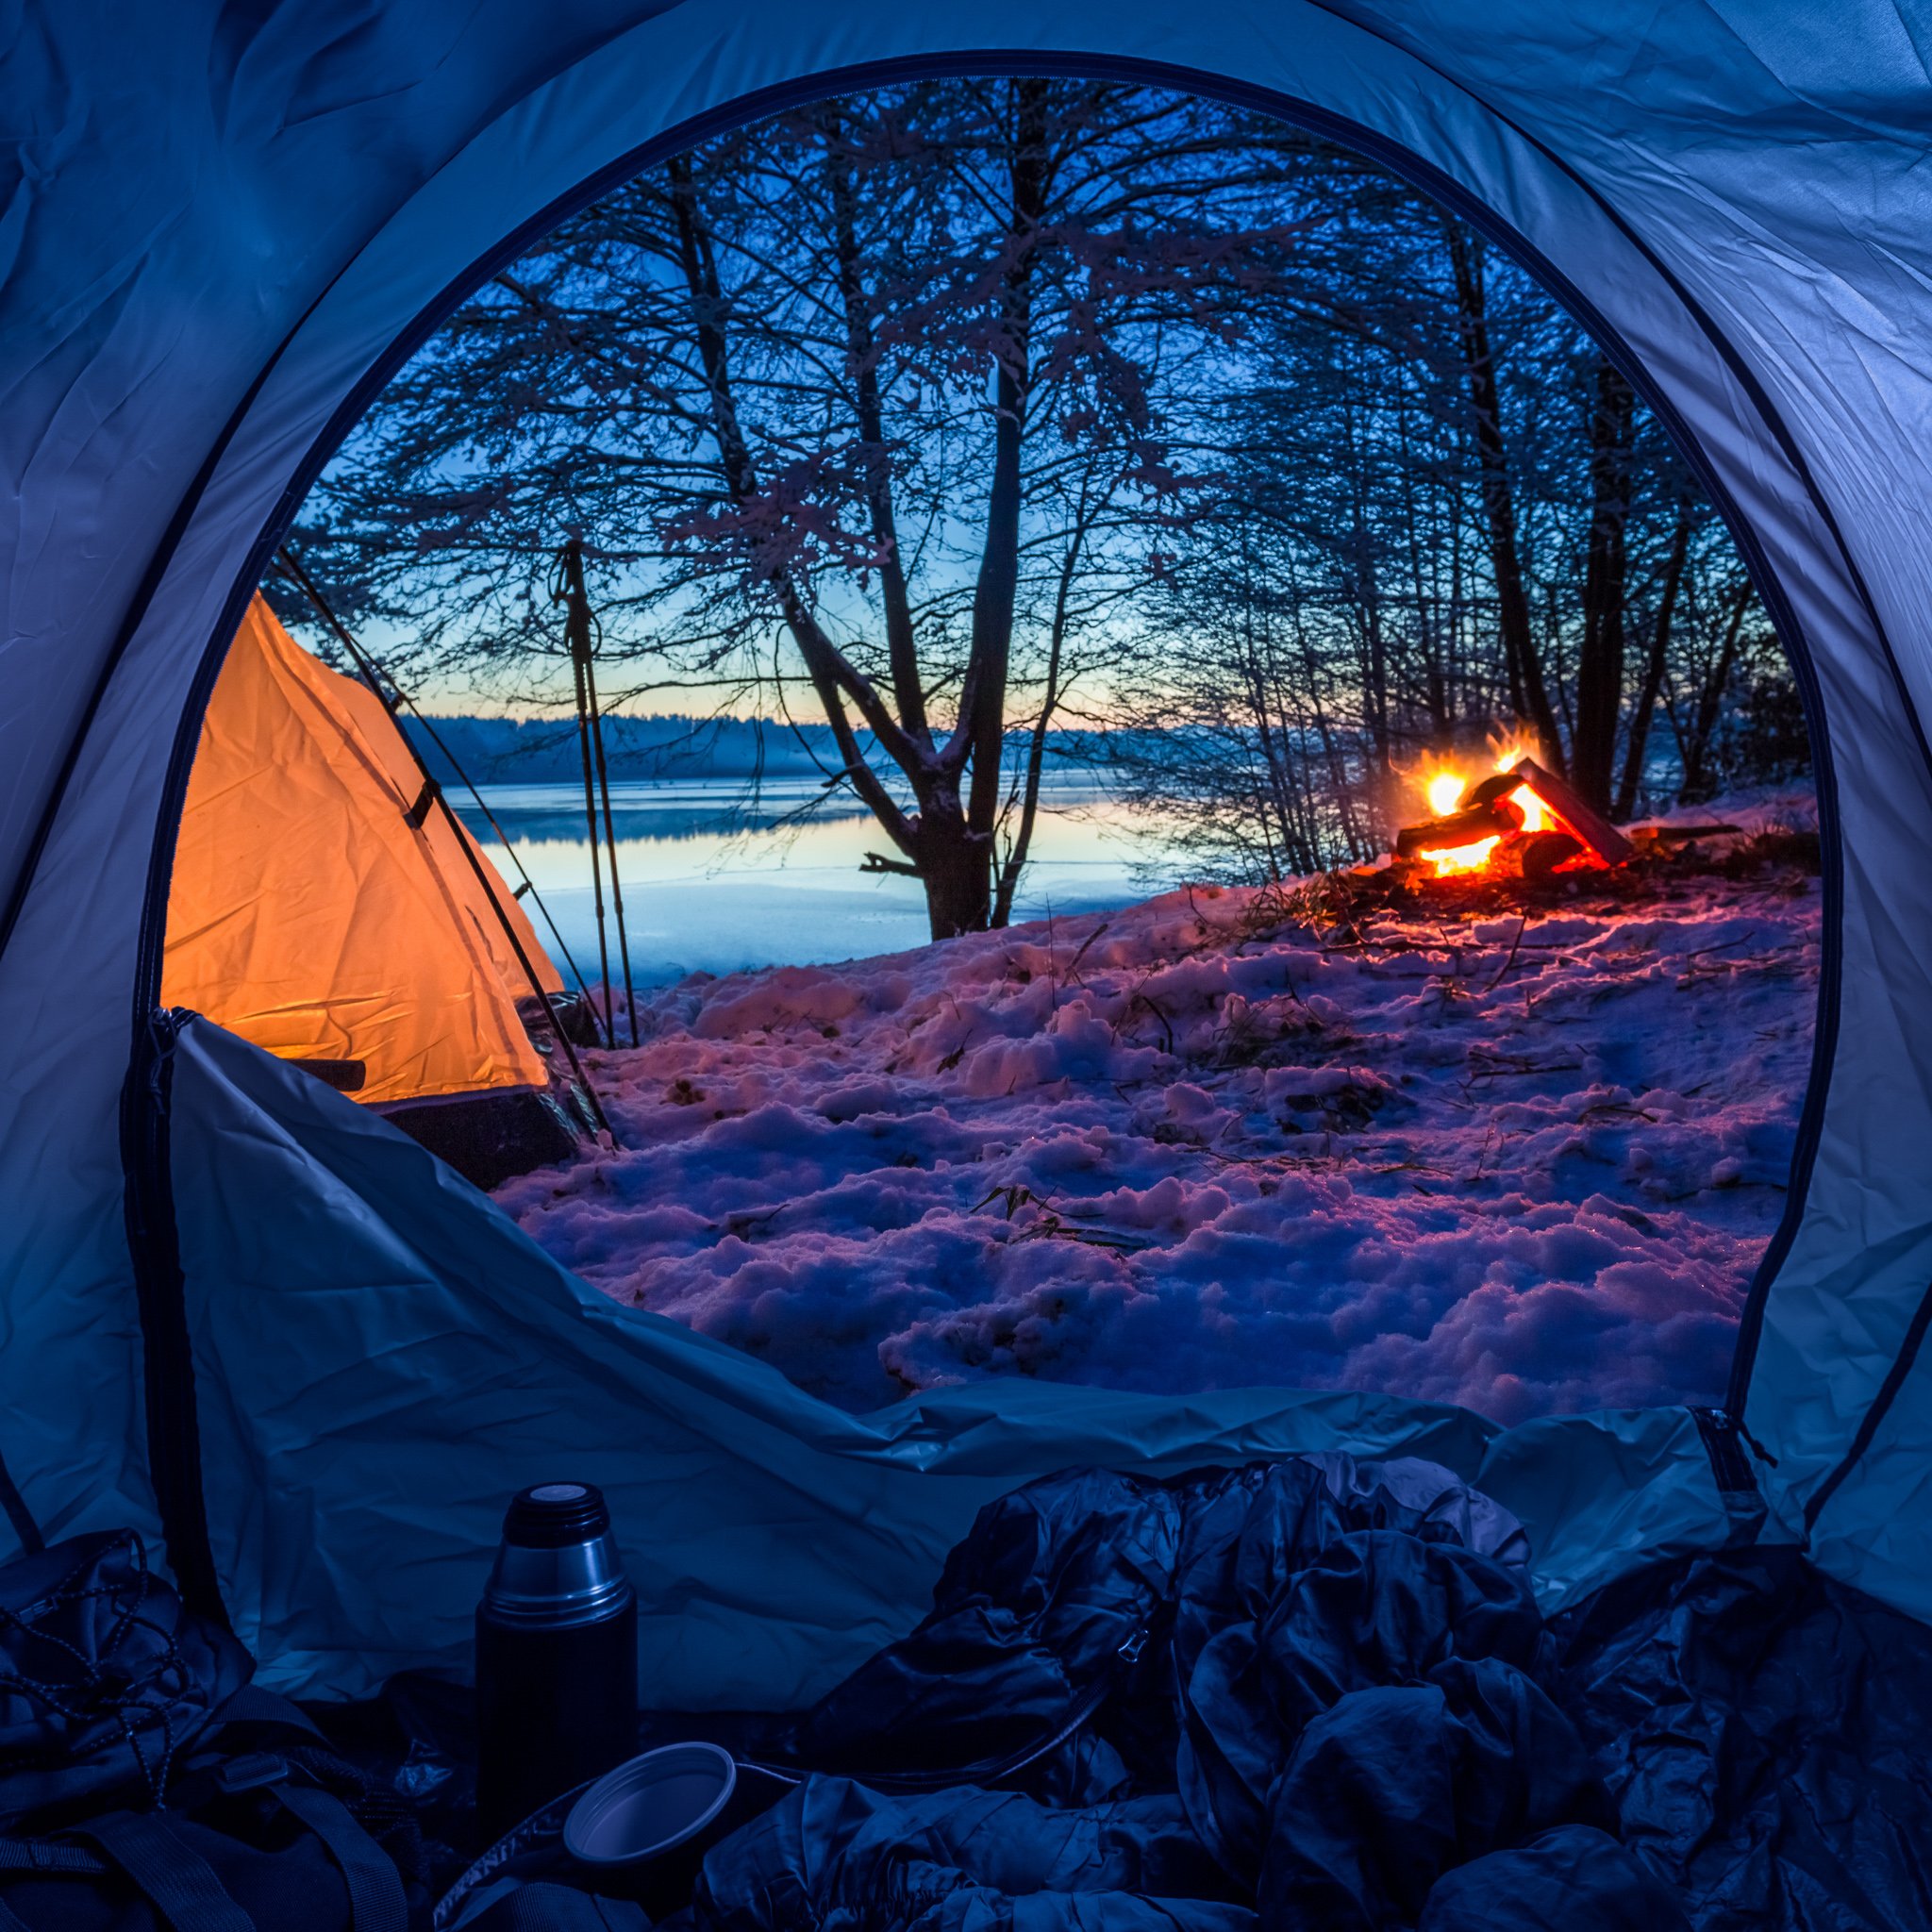 9 Tips For How to Keep Food Cold When Camping - The Expert Camper